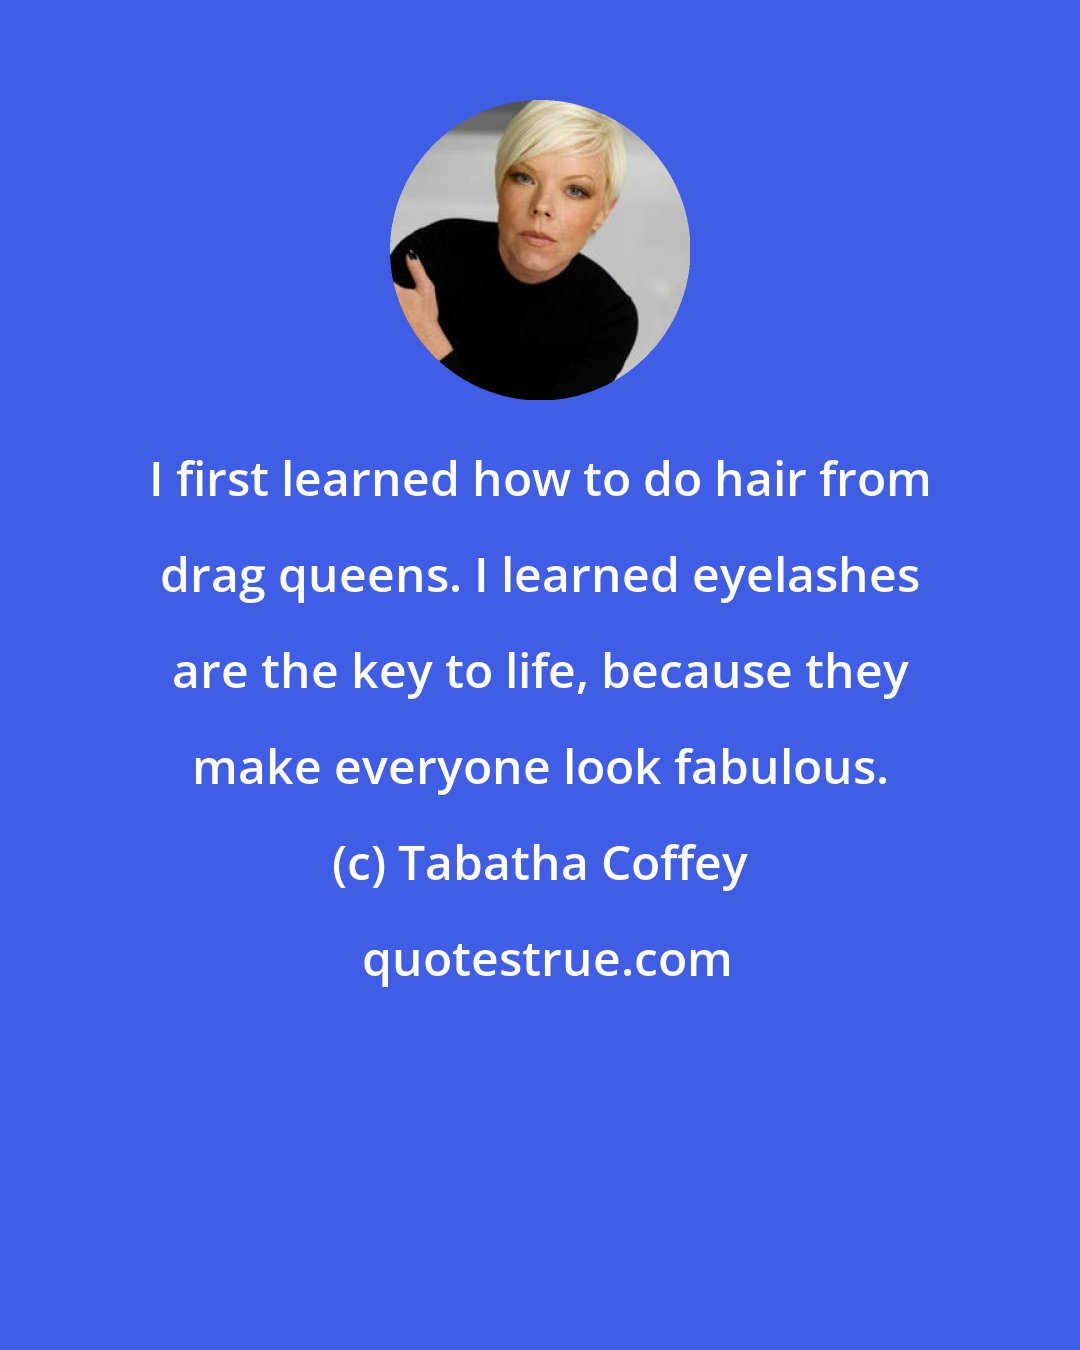 Tabatha Coffey: I first learned how to do hair from drag queens. I learned eyelashes are the key to life, because they make everyone look fabulous.